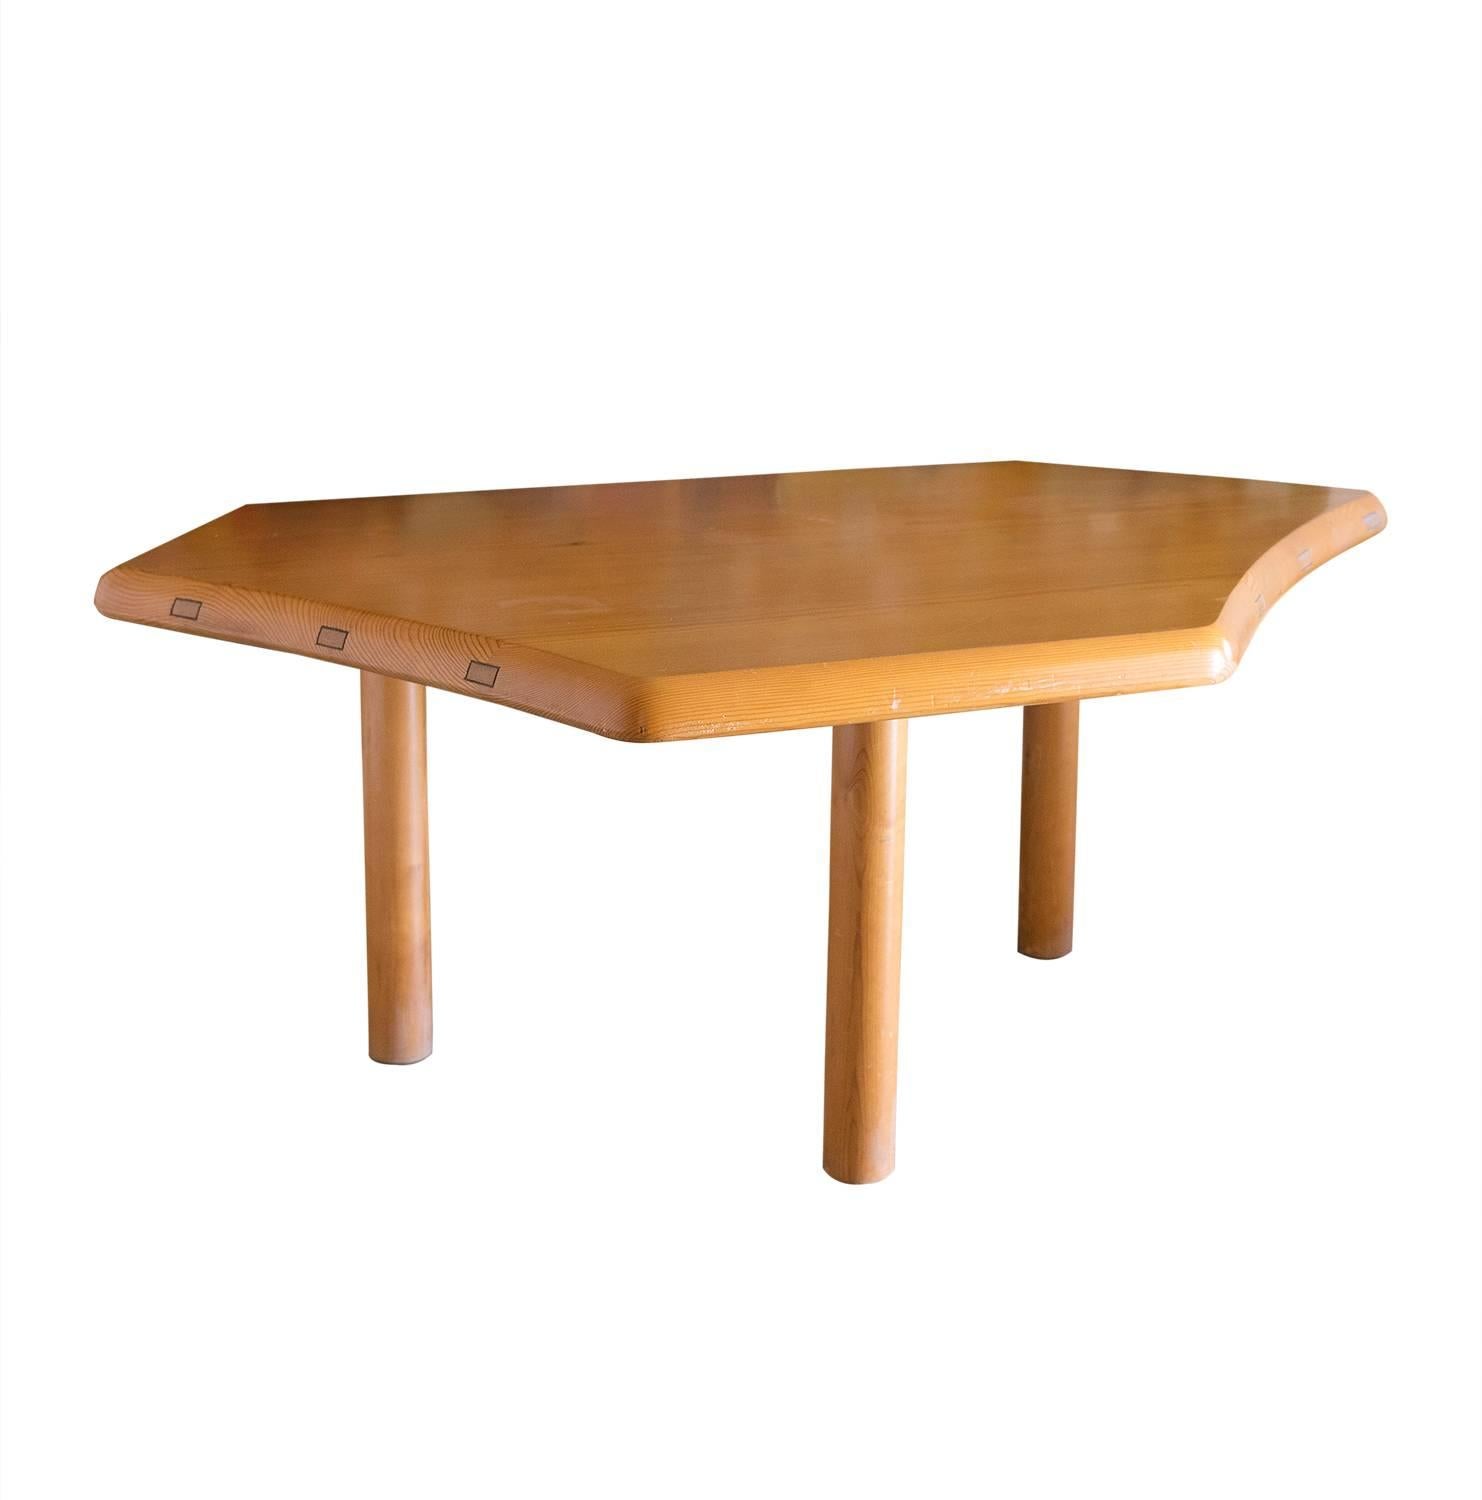 Table by Charlotte Perriand, Fir Wood, circa 1938 Montparnasse, France